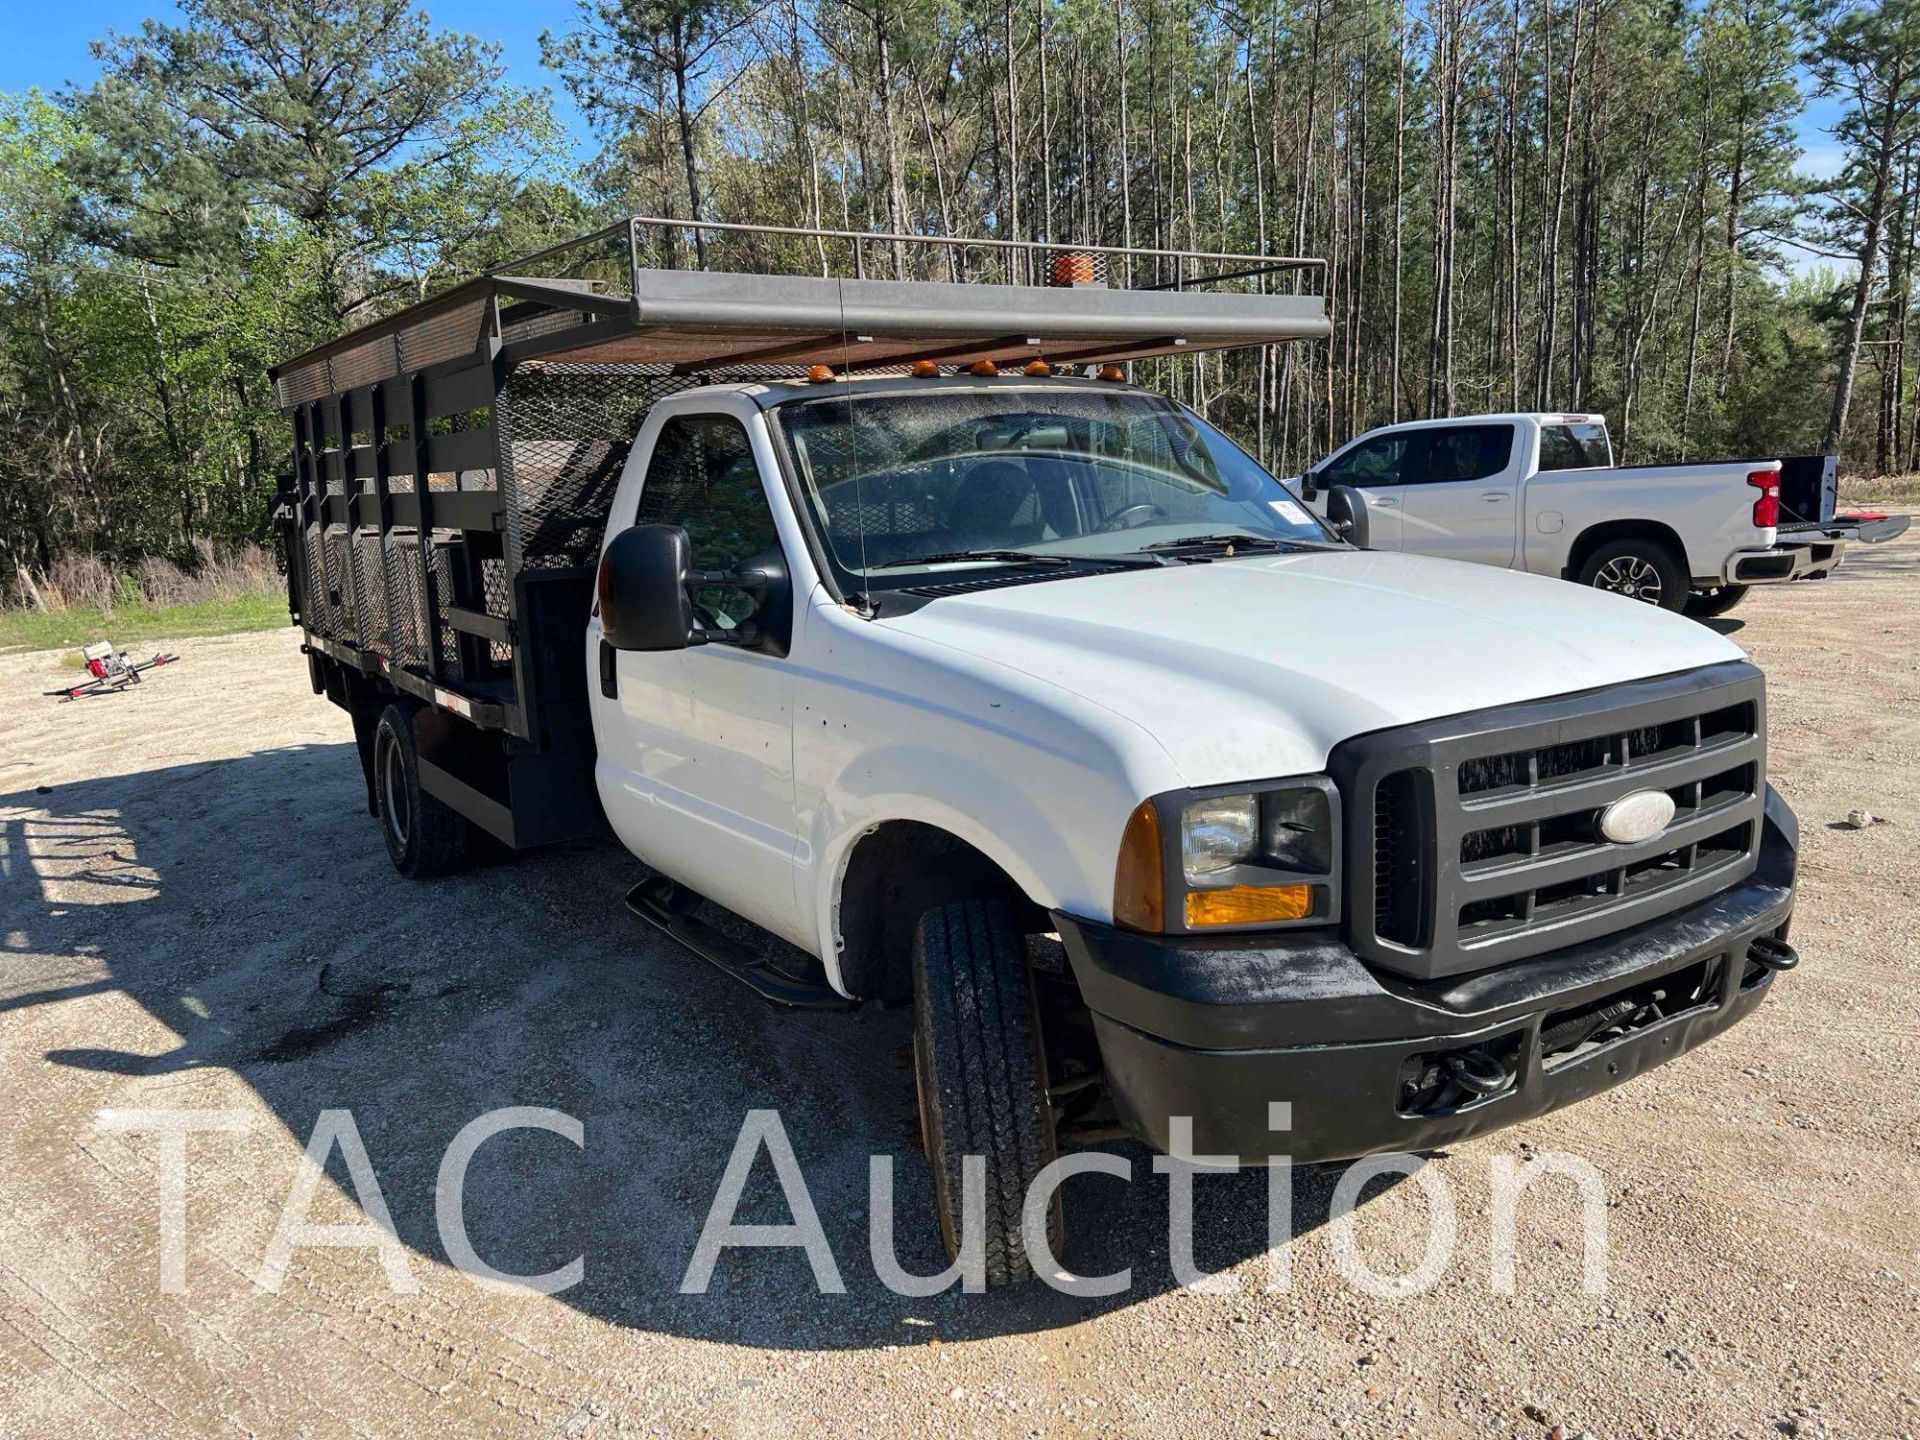 2005 Ford F350 4x4 W/ Landscape Body - Image 7 of 63